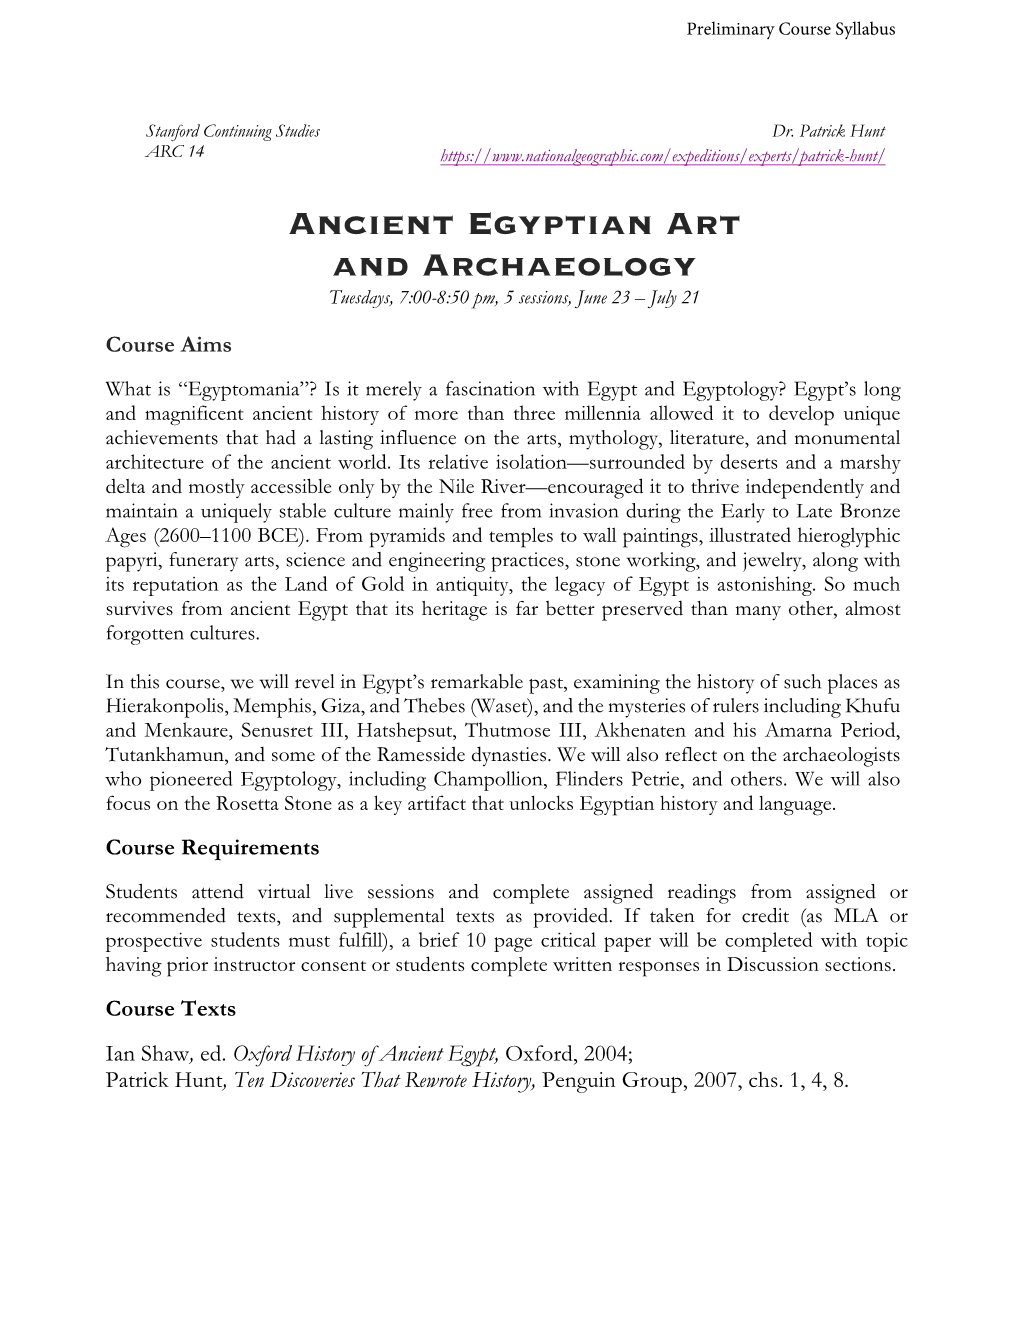 Ancient Egyptian Art and Archaeology Tuesdays, 7:00-8:50 Pm, 5 Sessions, June 23 – July 21